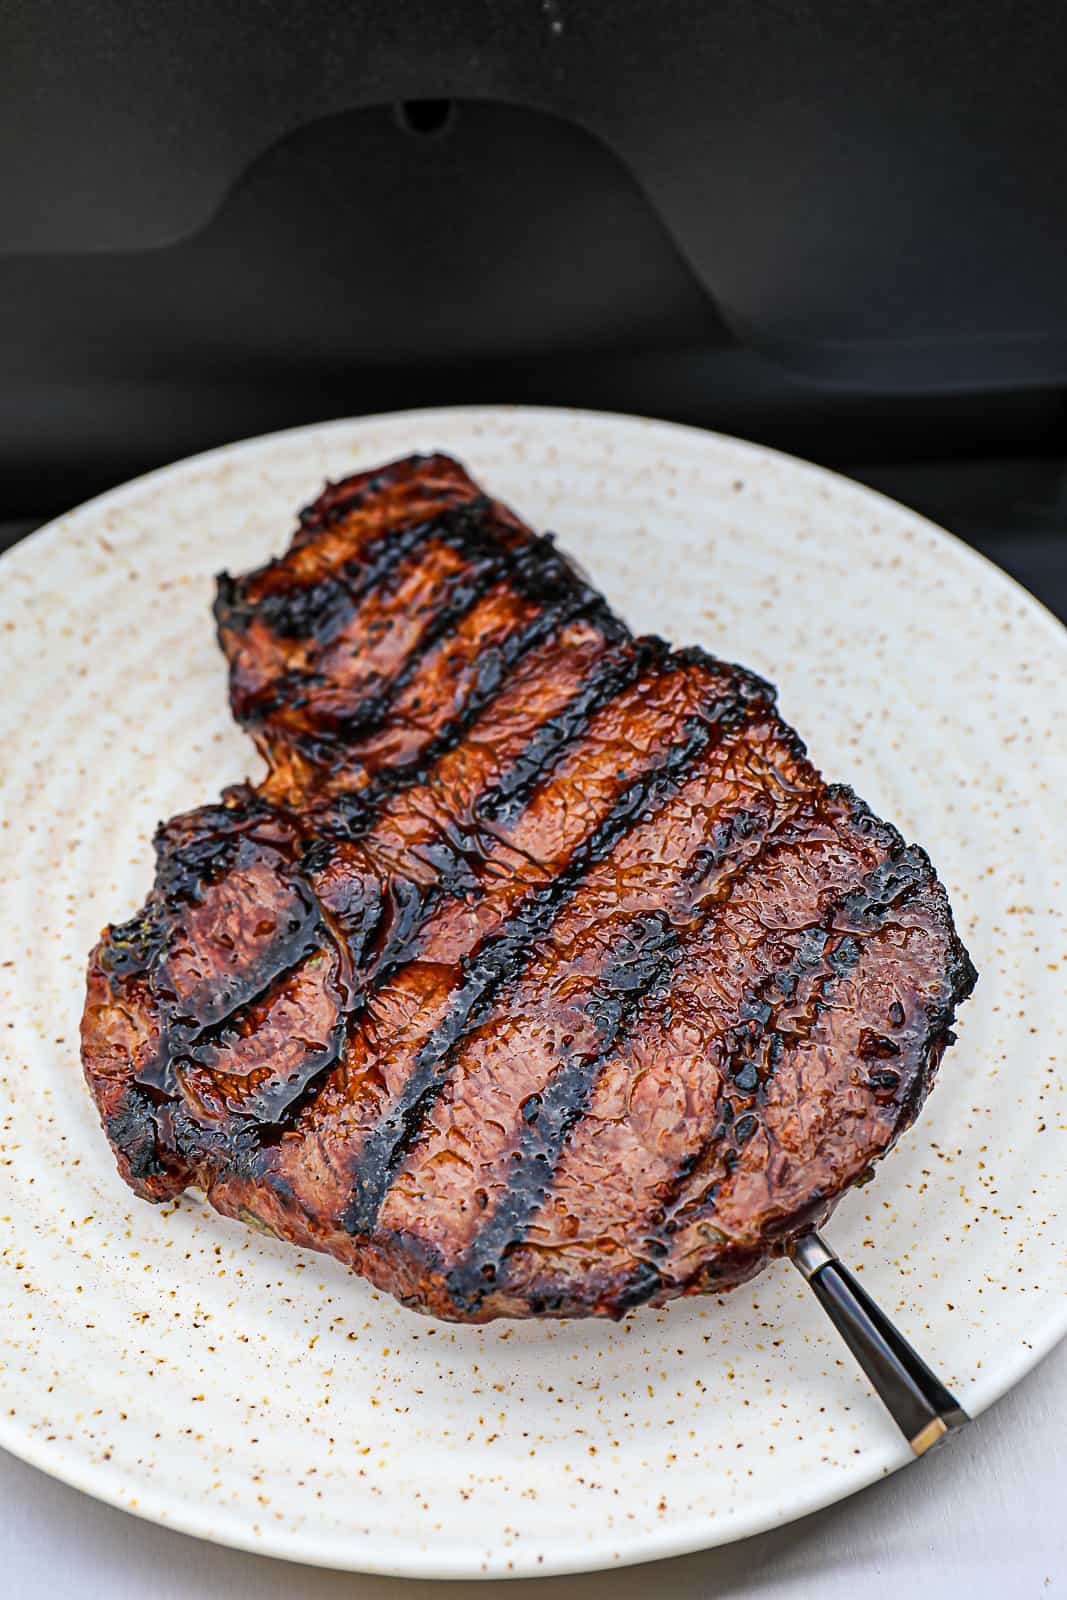 Grilled Sirloin Steak with grill marks sear